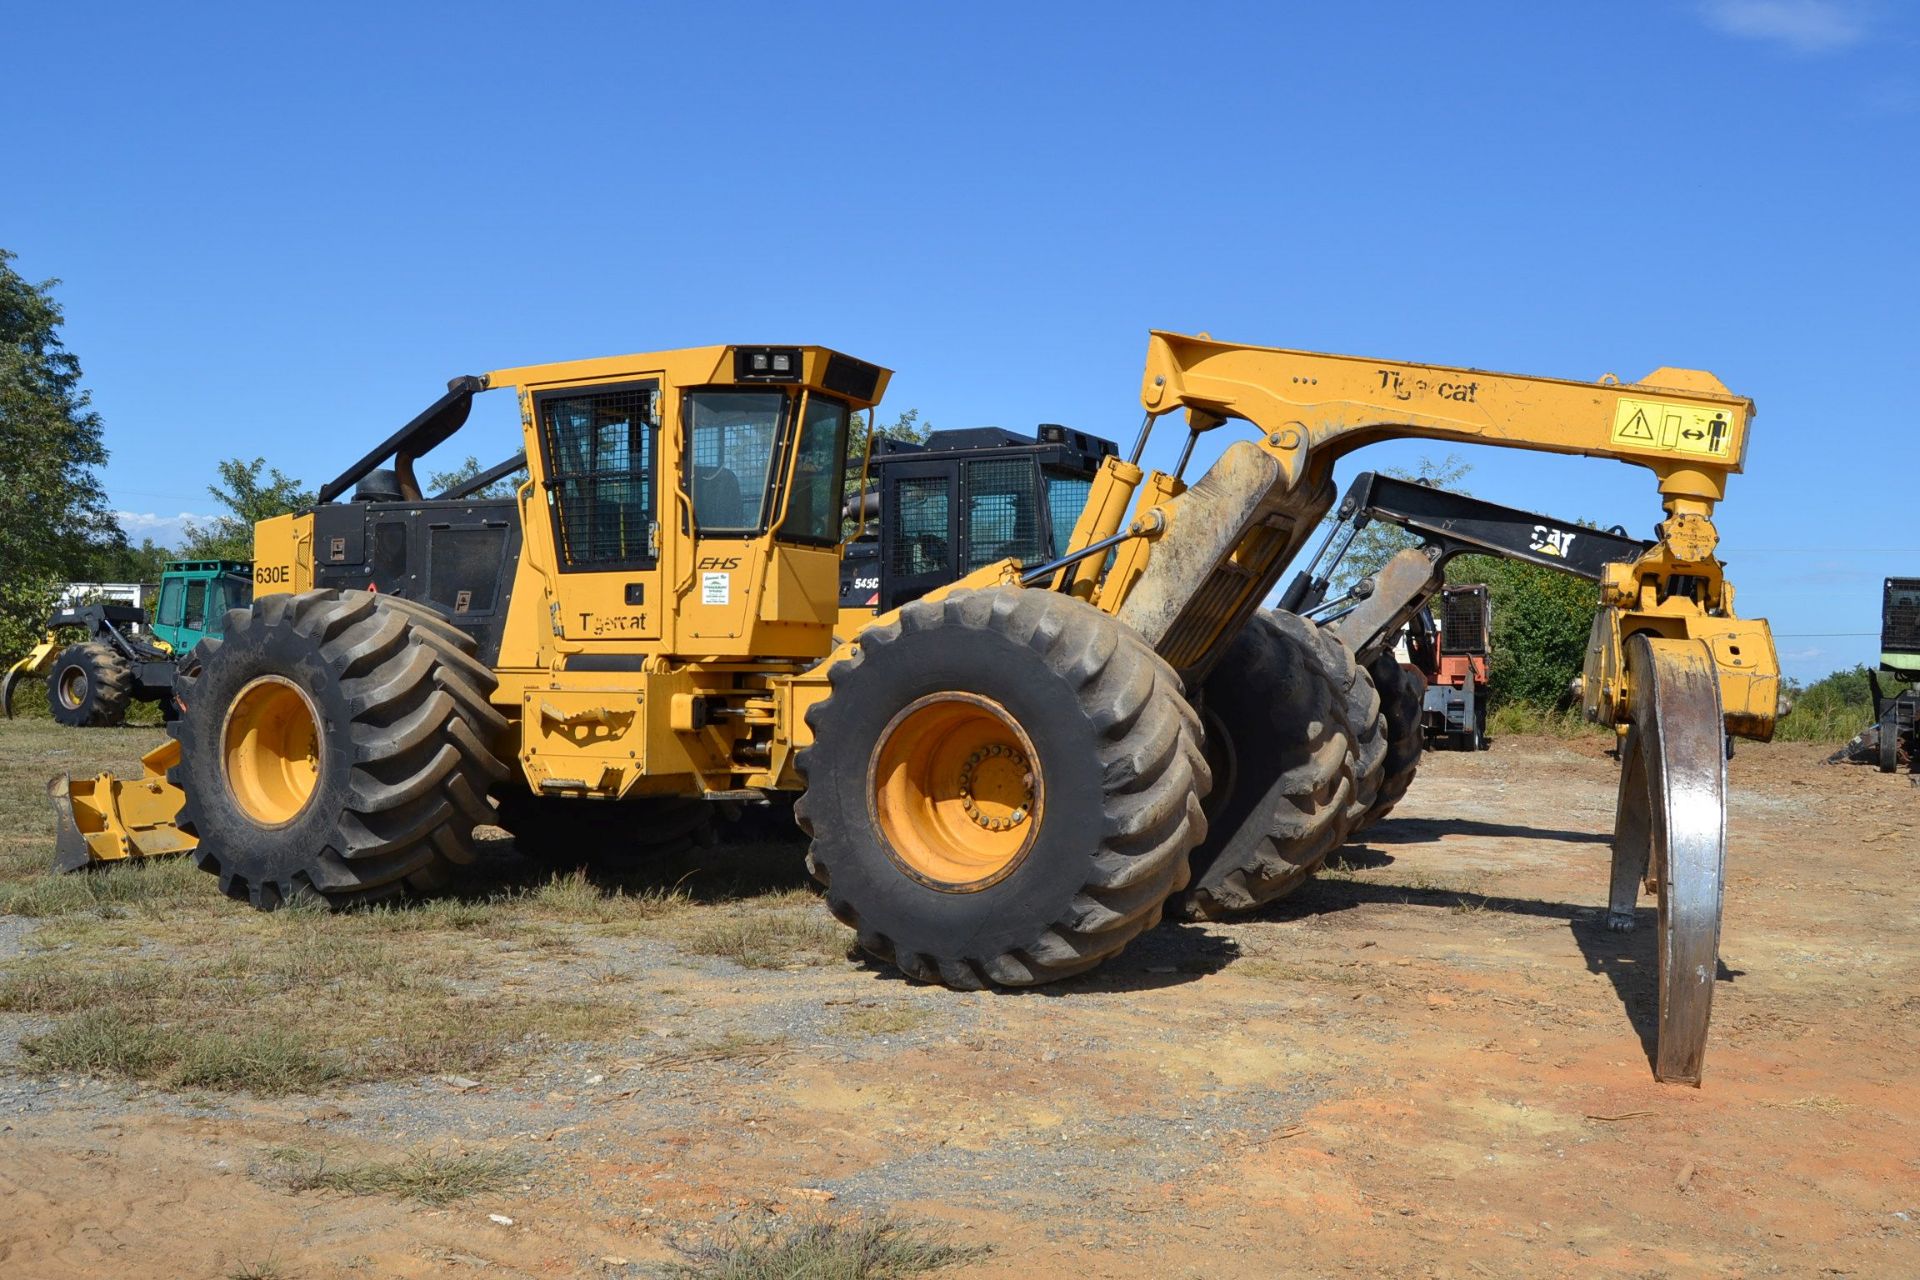 TIGERCAT 630E DUAL ARCH GRAPPLE SKIDDER W/ ENCLOSED CAB W/ HEAT & AIR W/ DH-73X44.00-32 TIRES SN# - Image 3 of 5